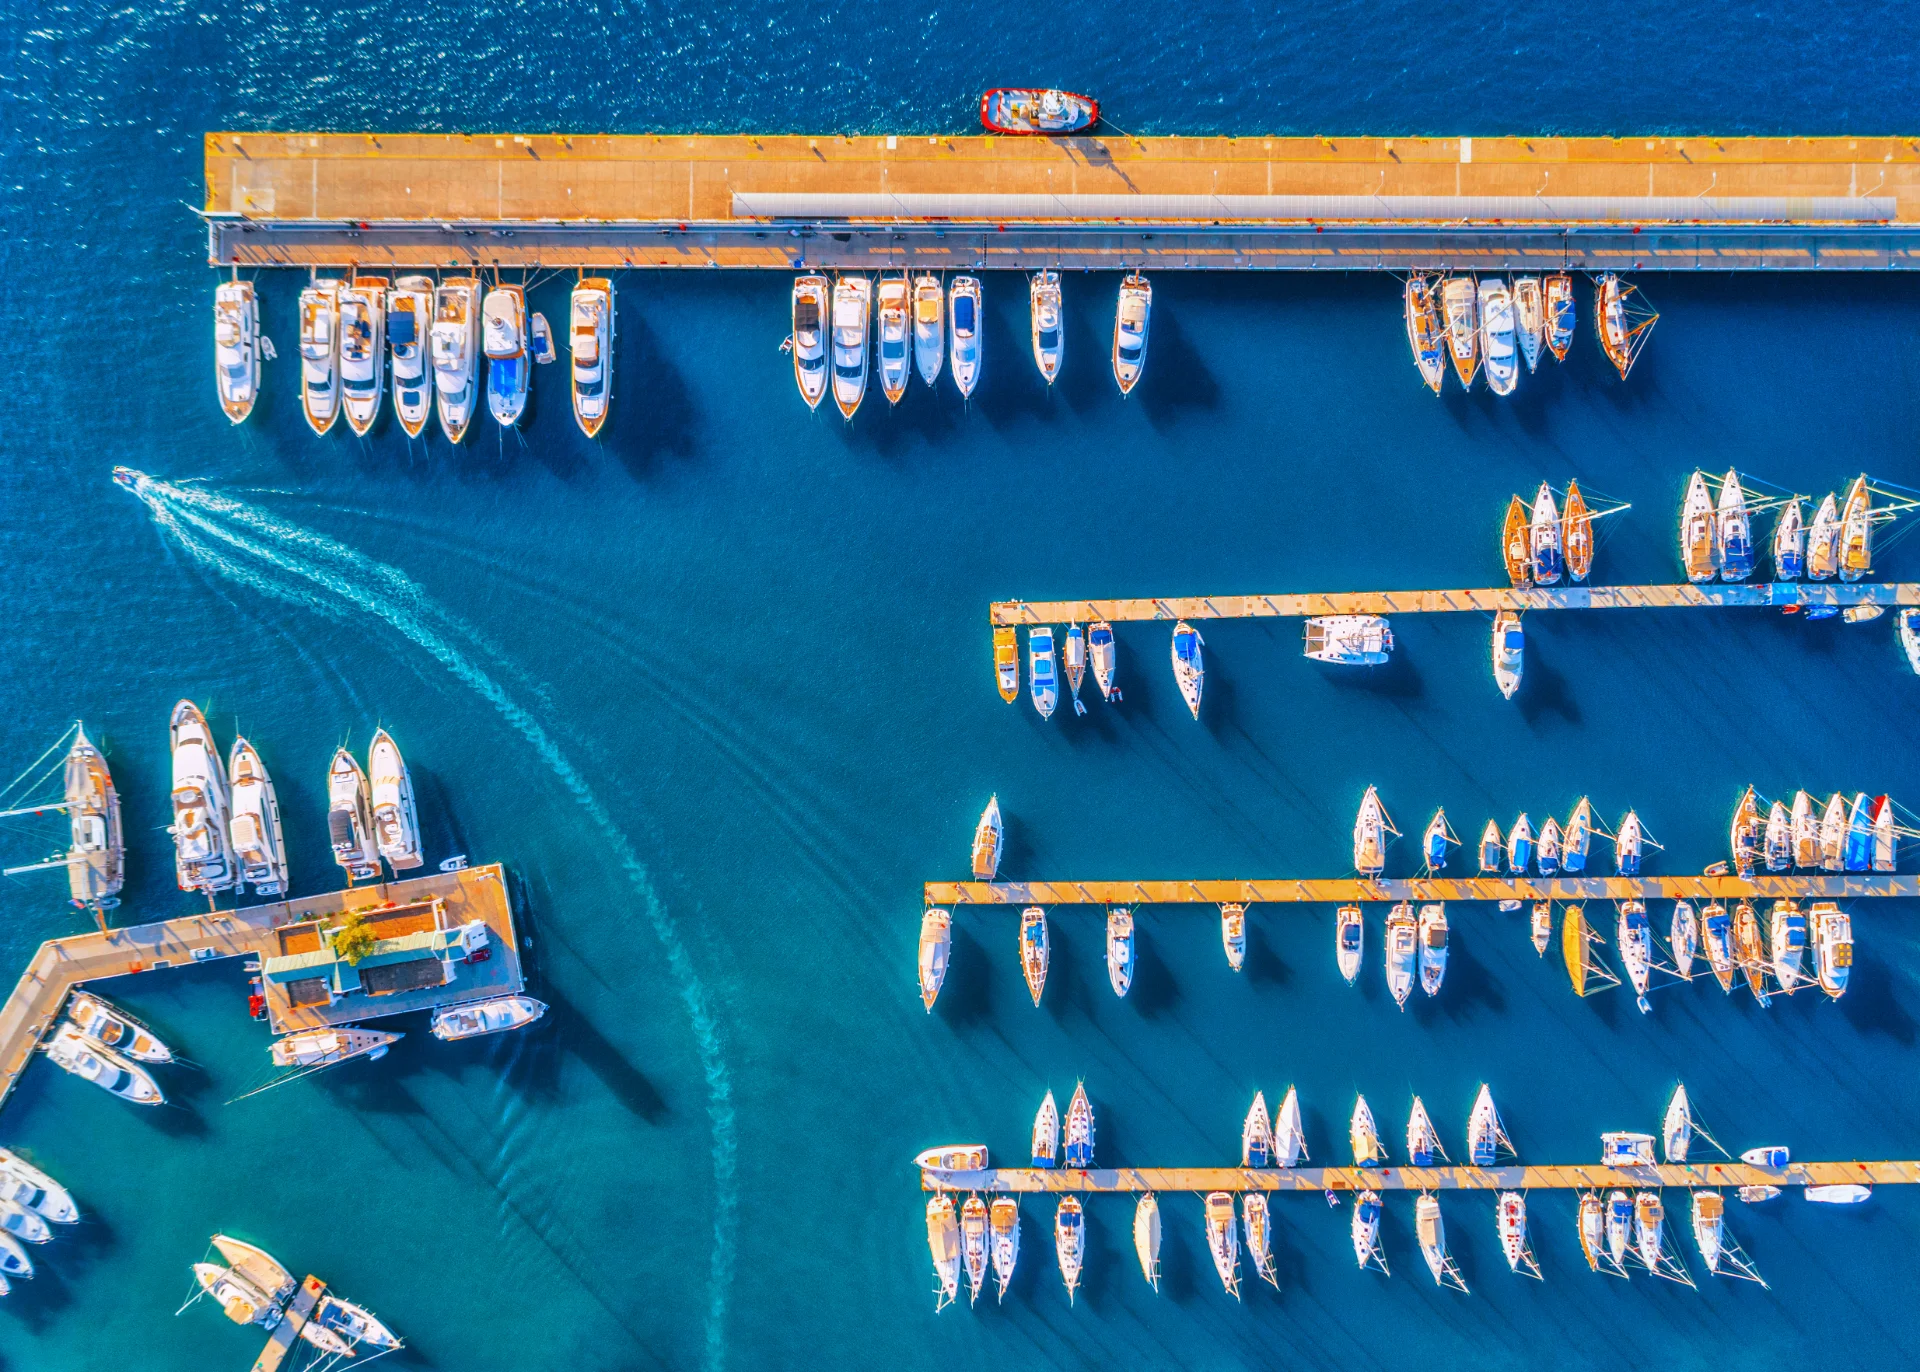 Aerial view of a vibrant marina with multiple docks extending into deep blue waters. Numerous boats and yachts are moored alongside the docks, and a small boat leaves a curved wake as it moves away from the marina. The sunlight creates vivid reflections on the water.